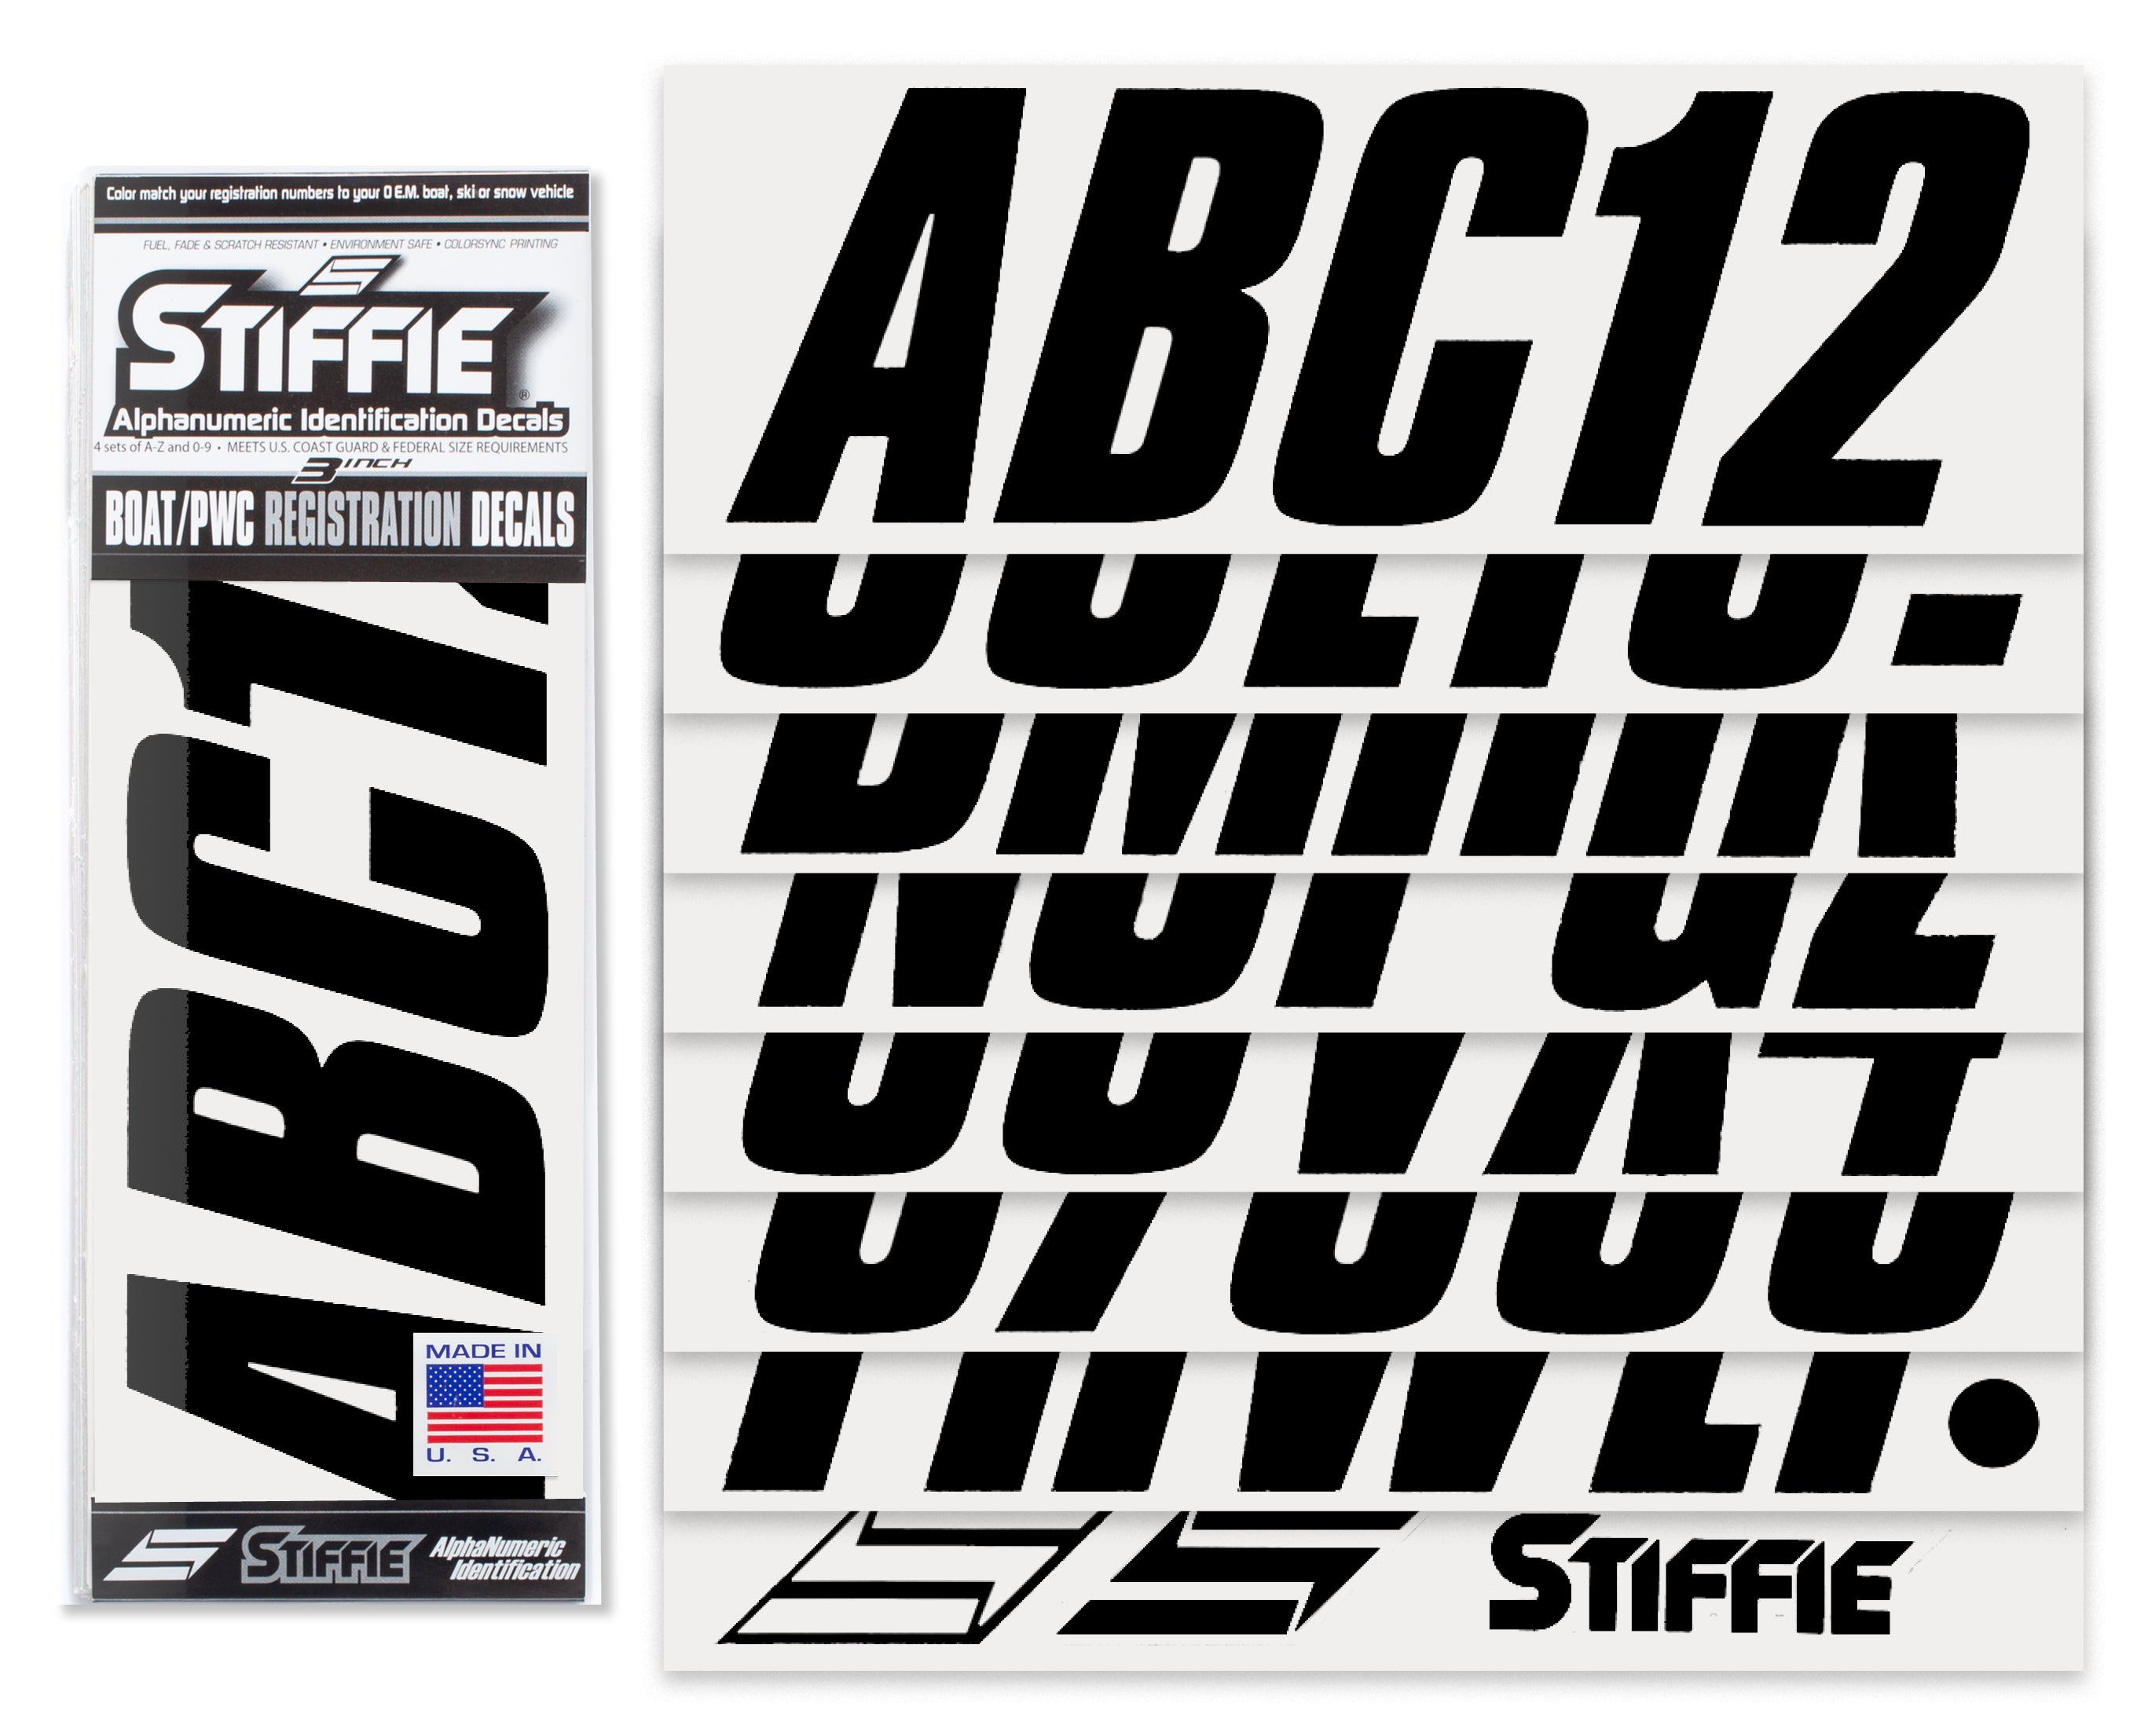 STIFFIE Shift Black 3" ID Kit Alpha-Numeric Registration Identification Numbers Stickers Decals for Boats & Personal Watercraft